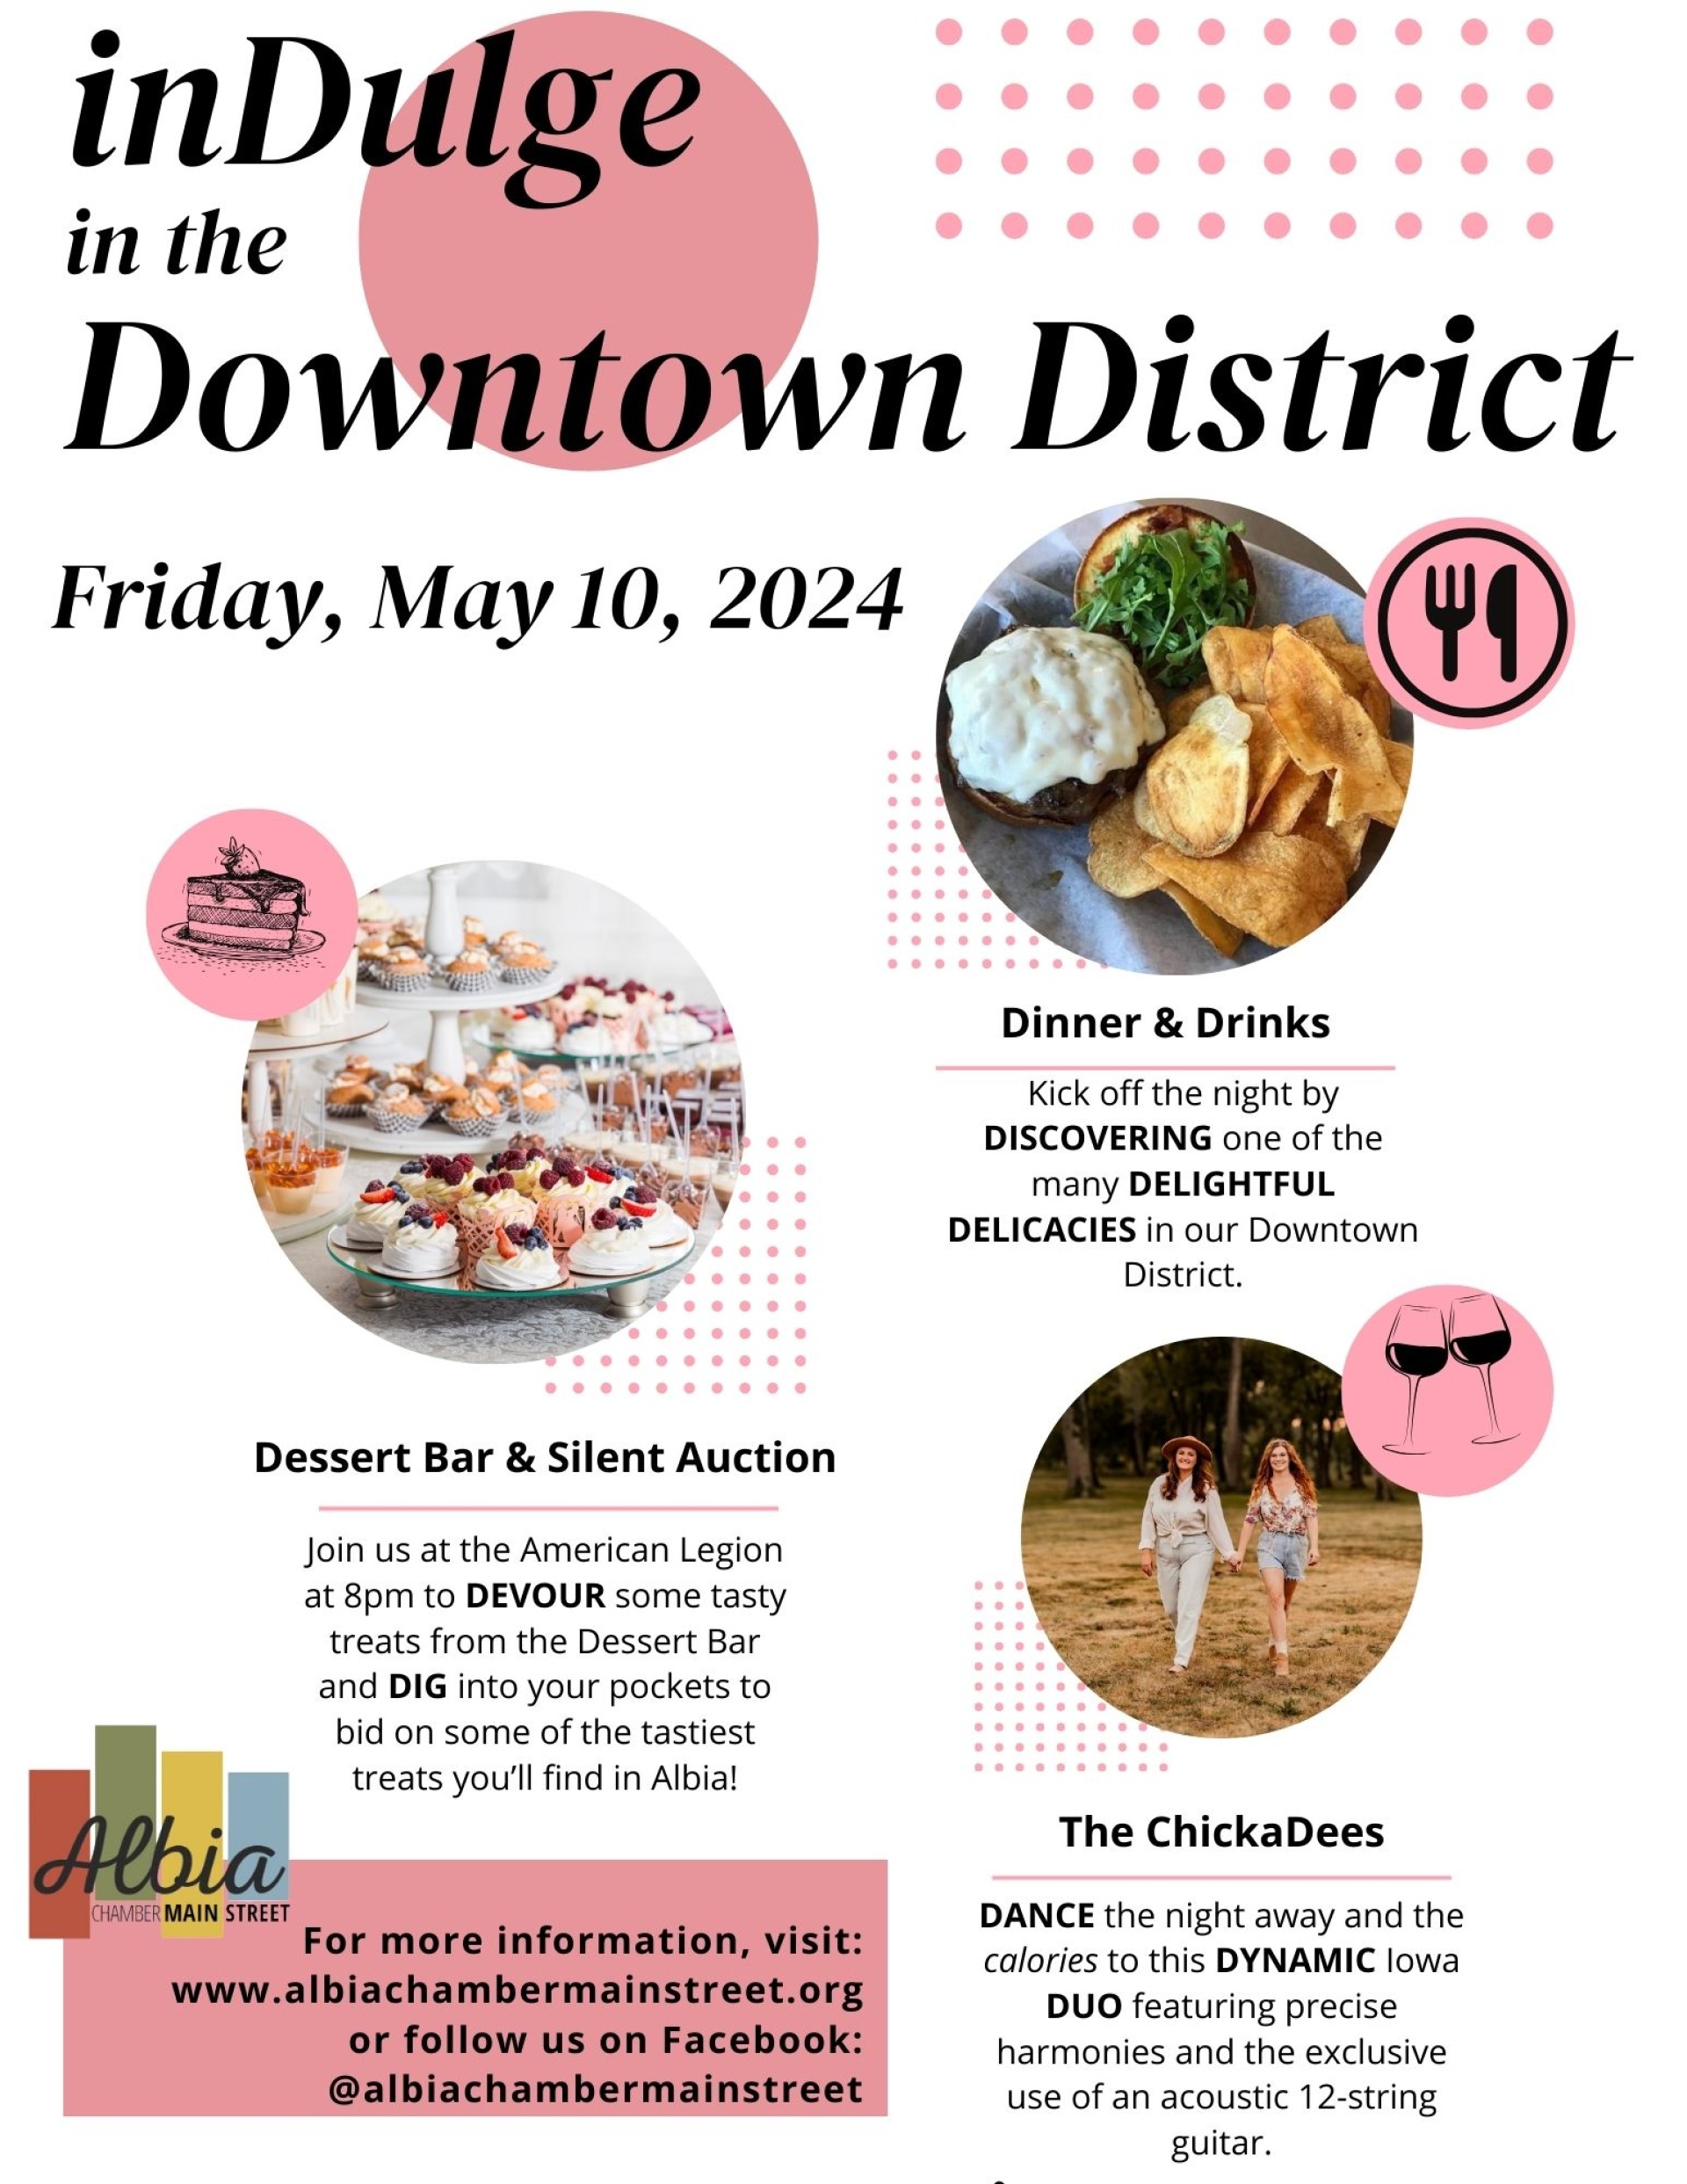 inDulge in the Downtown District